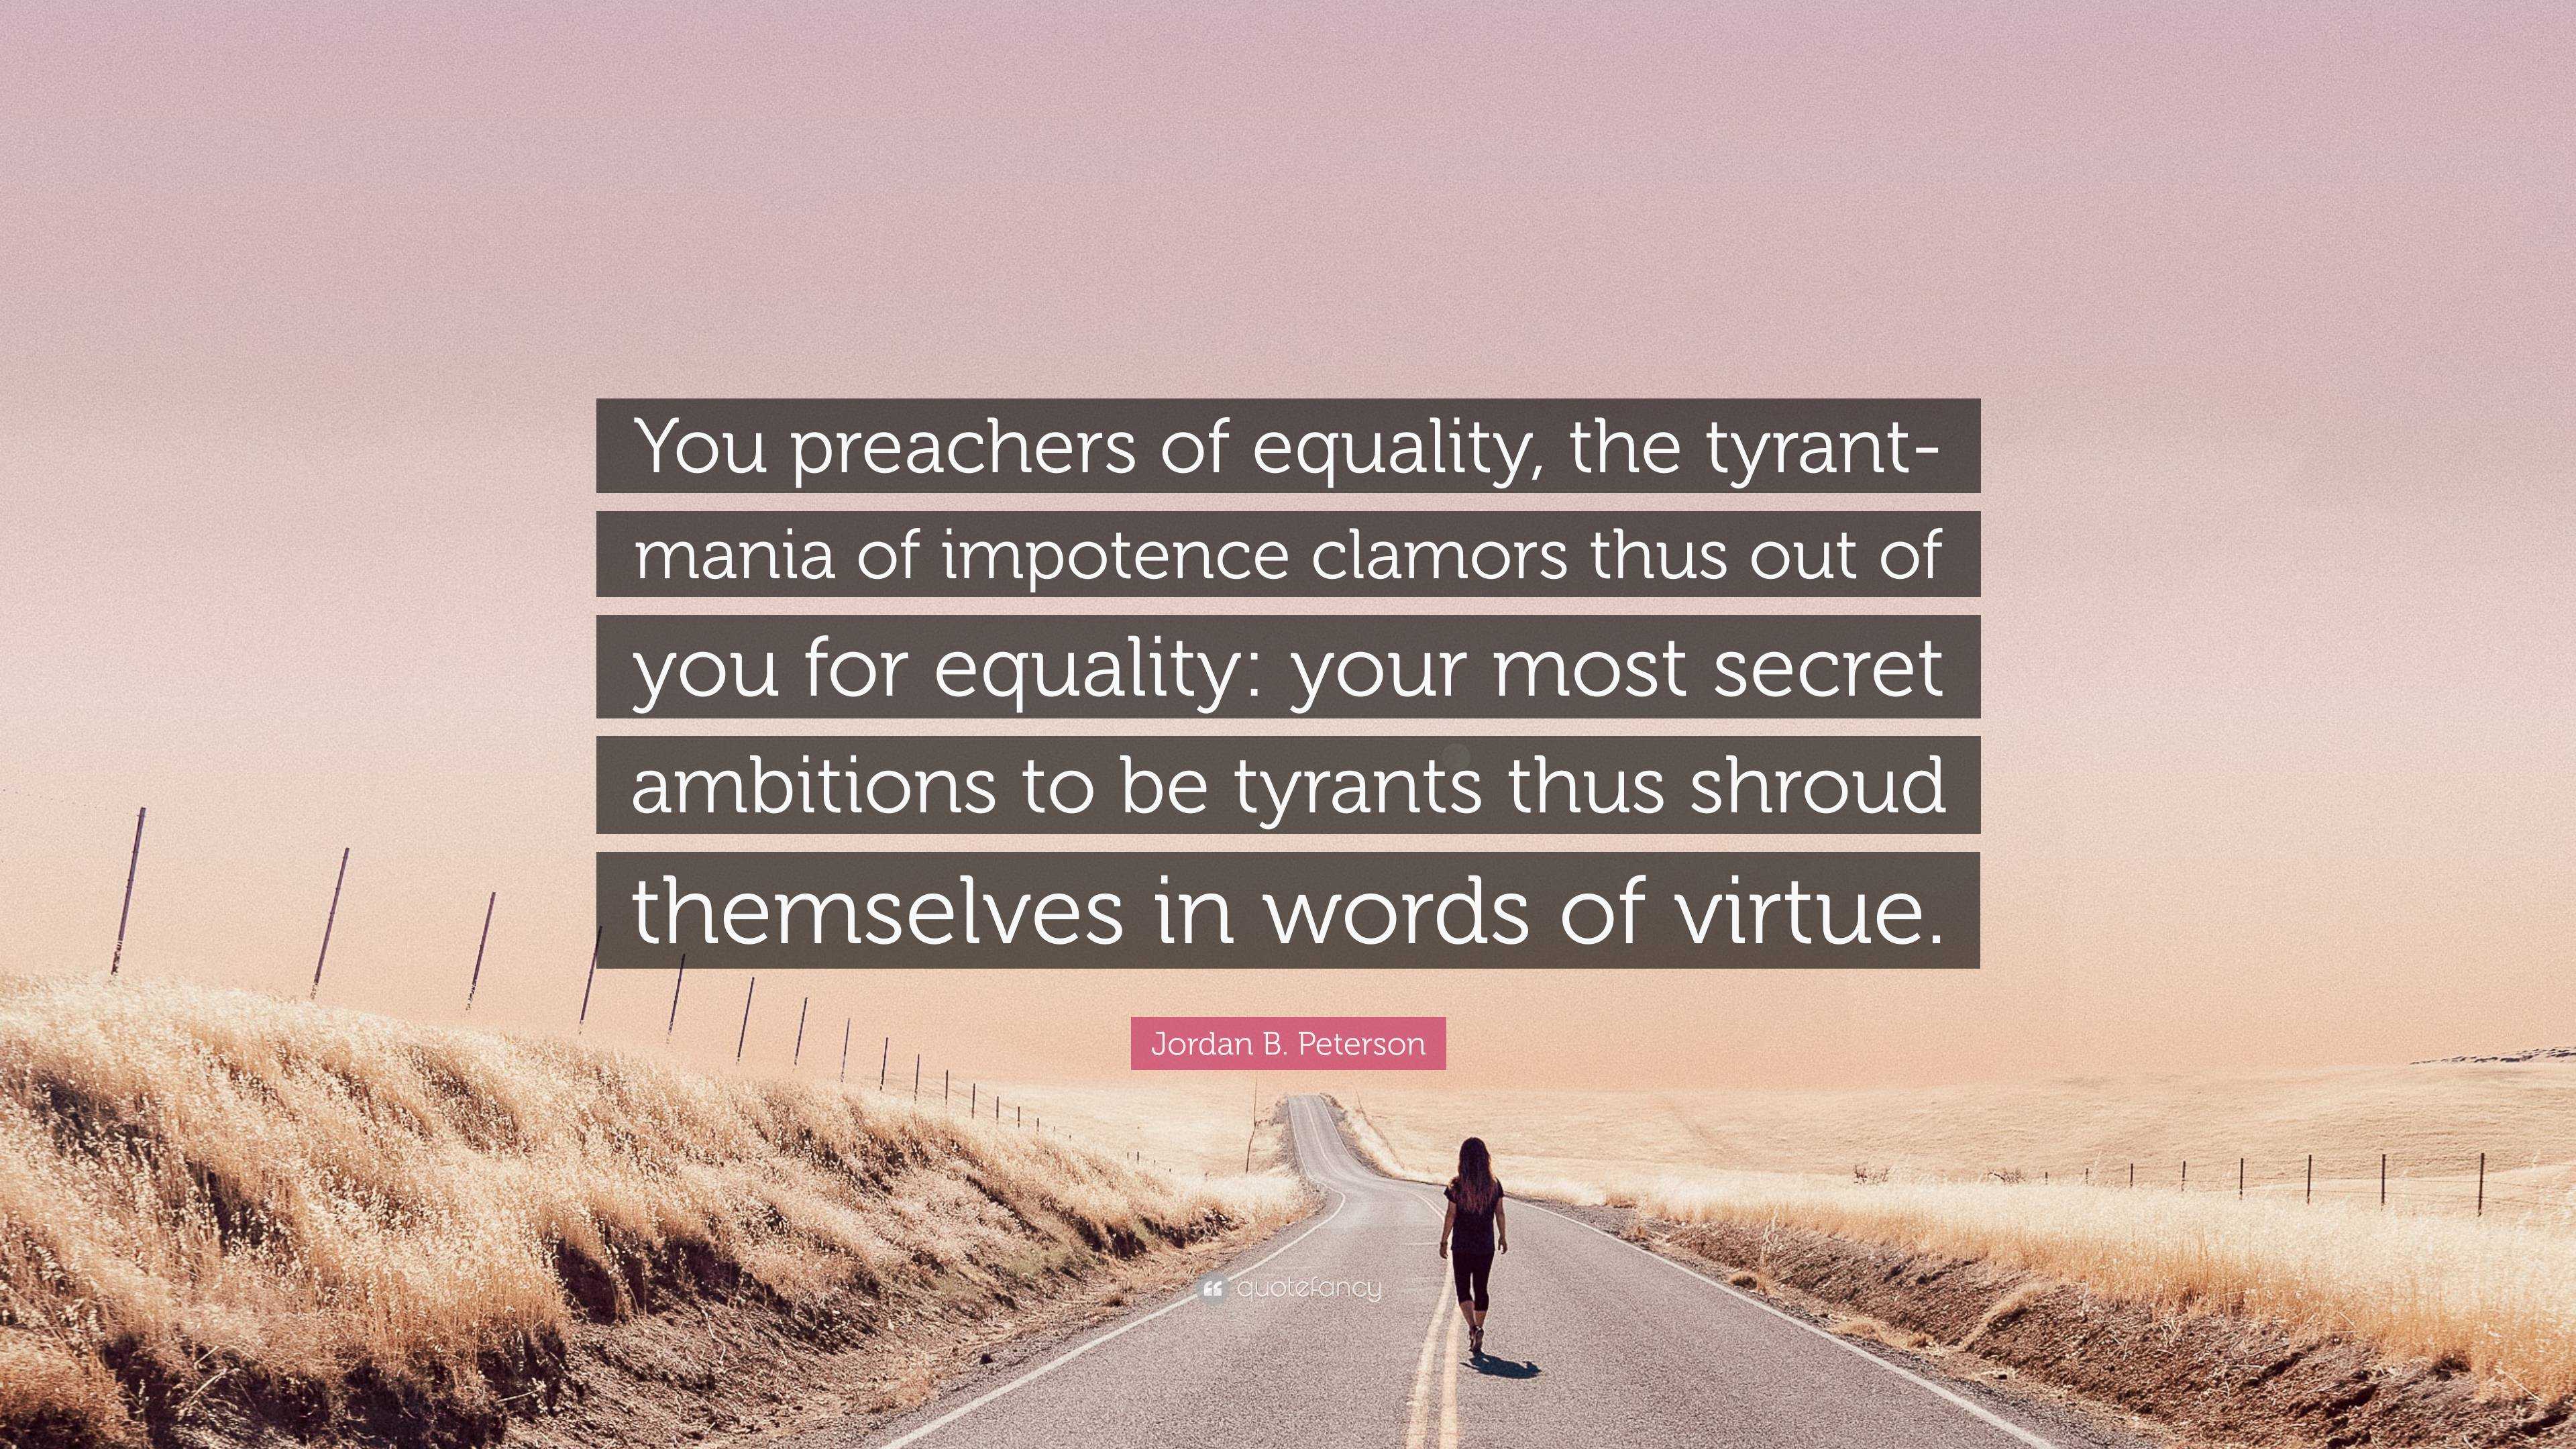 Jordan B. Peterson Quote: “You preachers of equality, the tyrant-mania impotence clamors thus out of you your most secret ambition...”